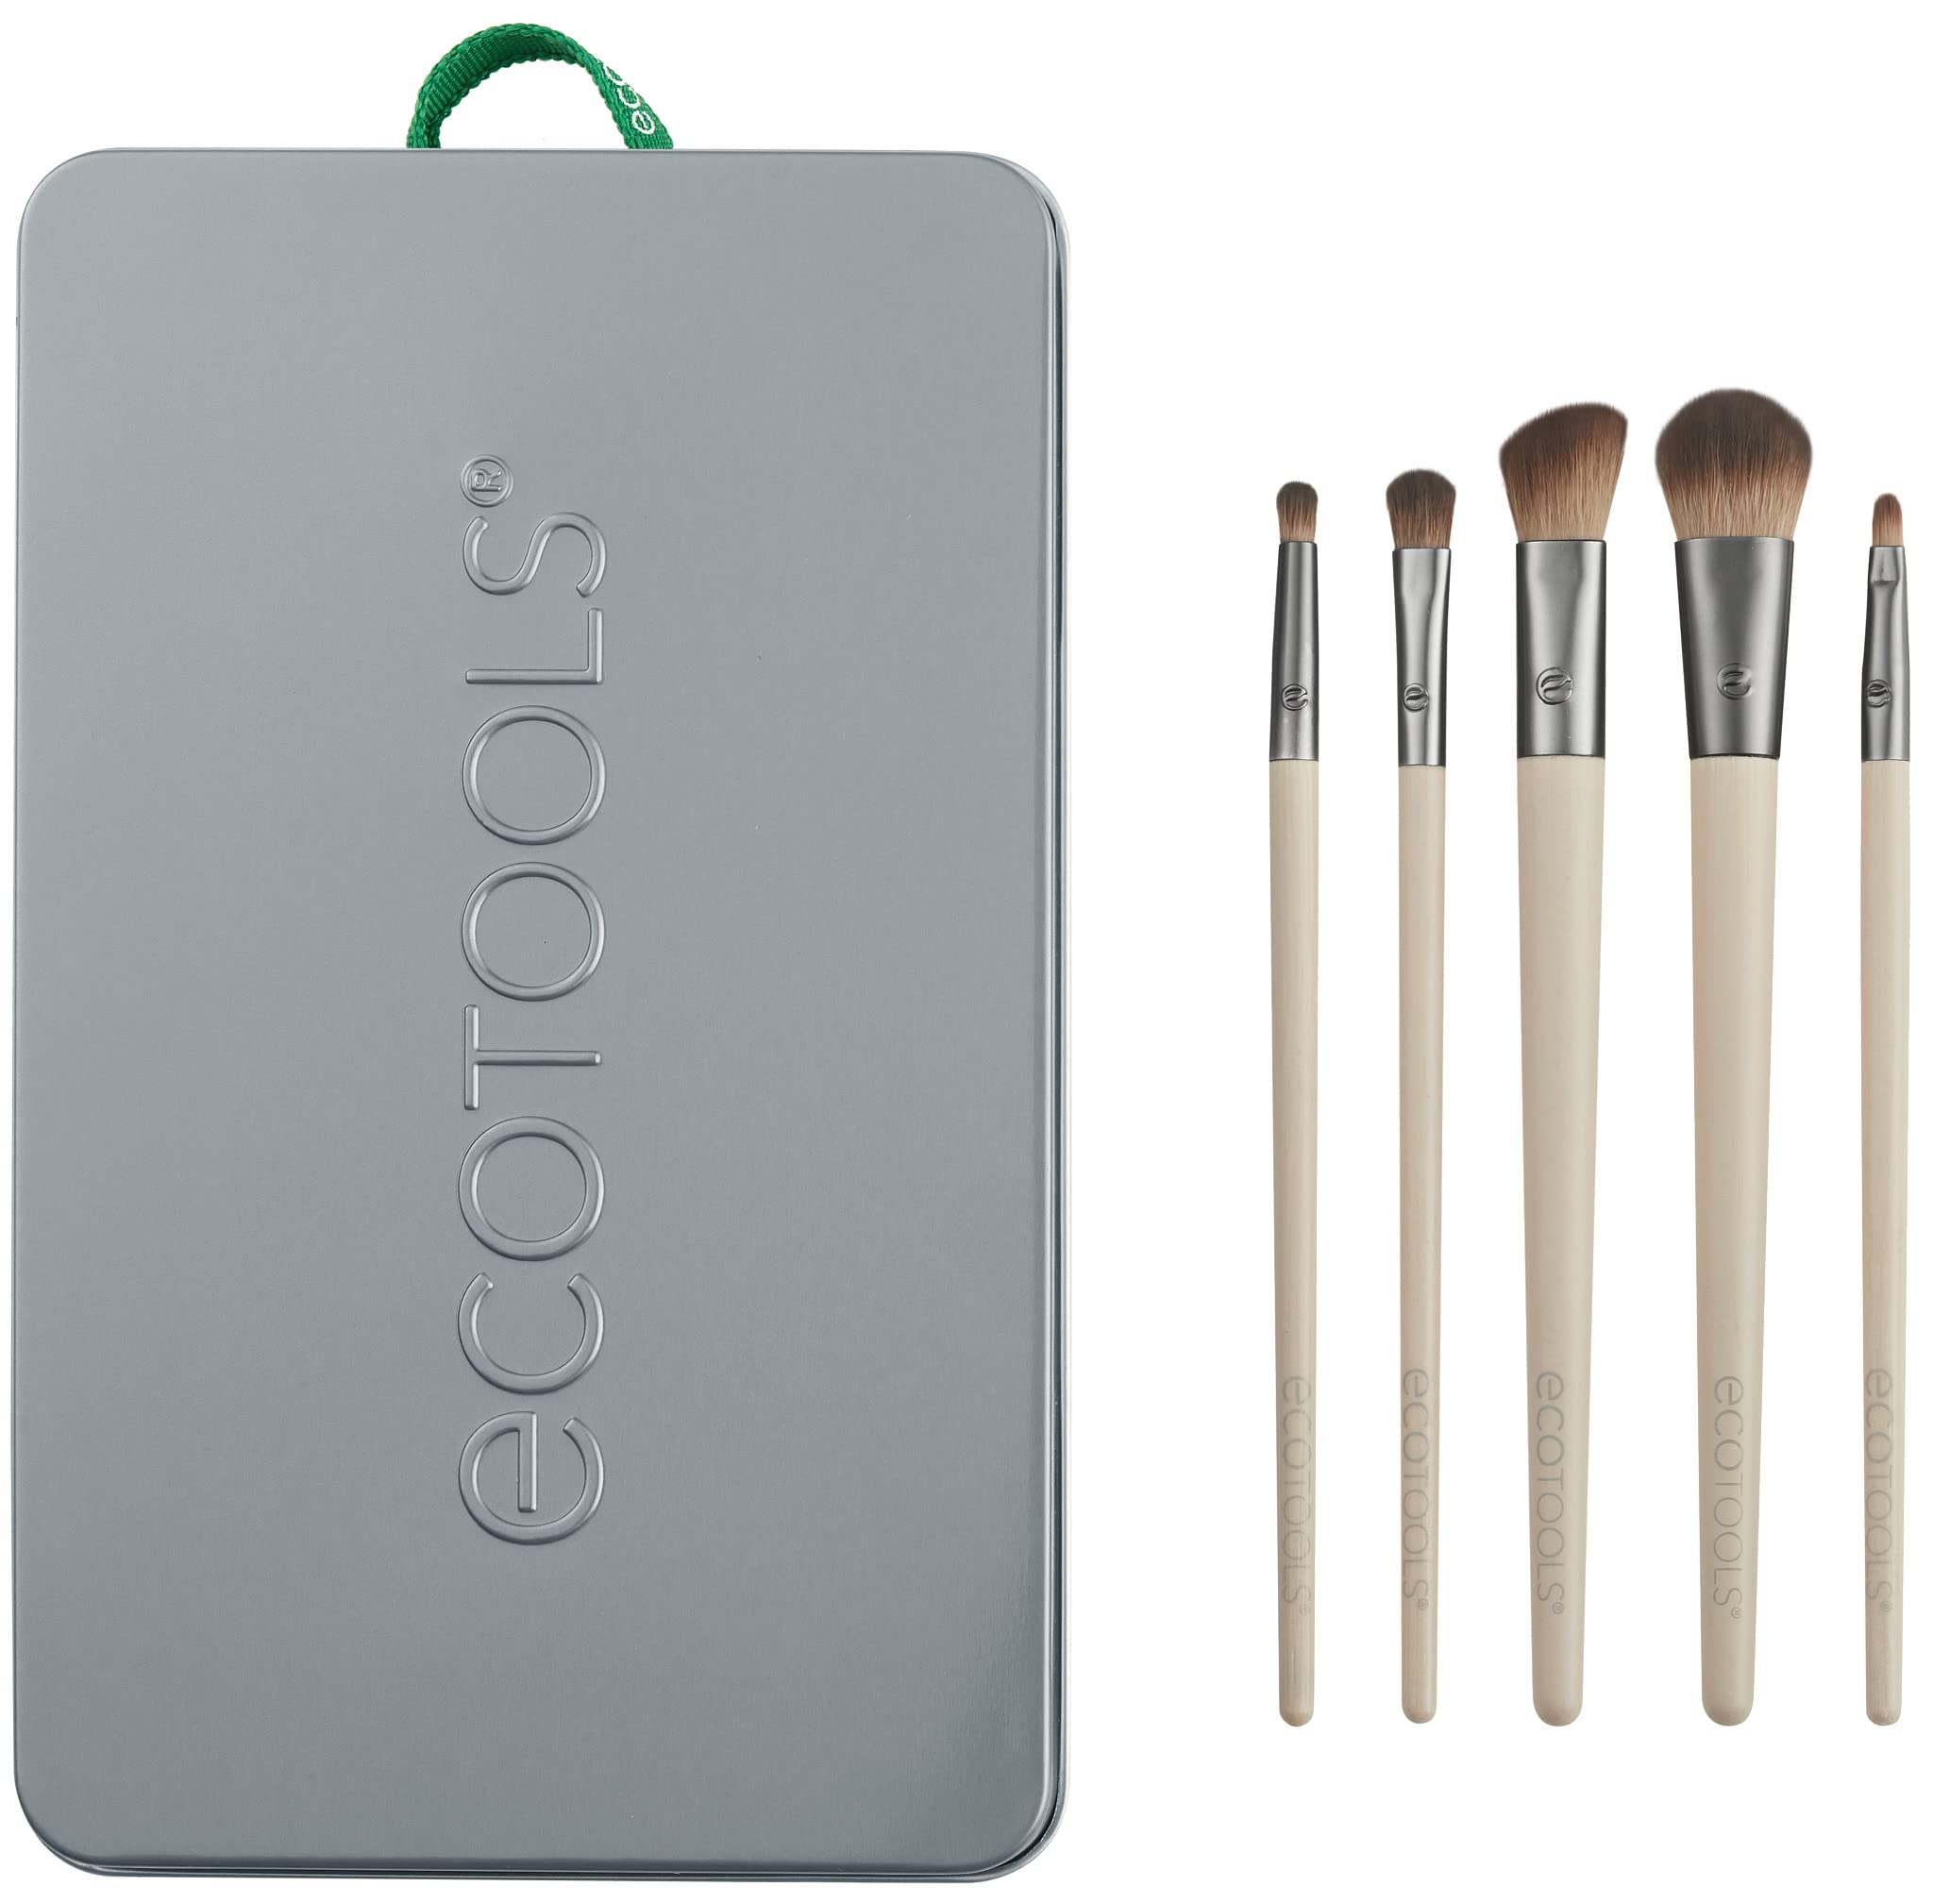 EcoTools Daily Defined Eye Makeup Brush Kit, Travel Friendly, Versatile Eye Makeup Looks, Convenient Makeup Tools On-The-Go, For Eyeshadow & Eye Liner, Eco-Friendly Makeup Brushes, 6 Piece Set